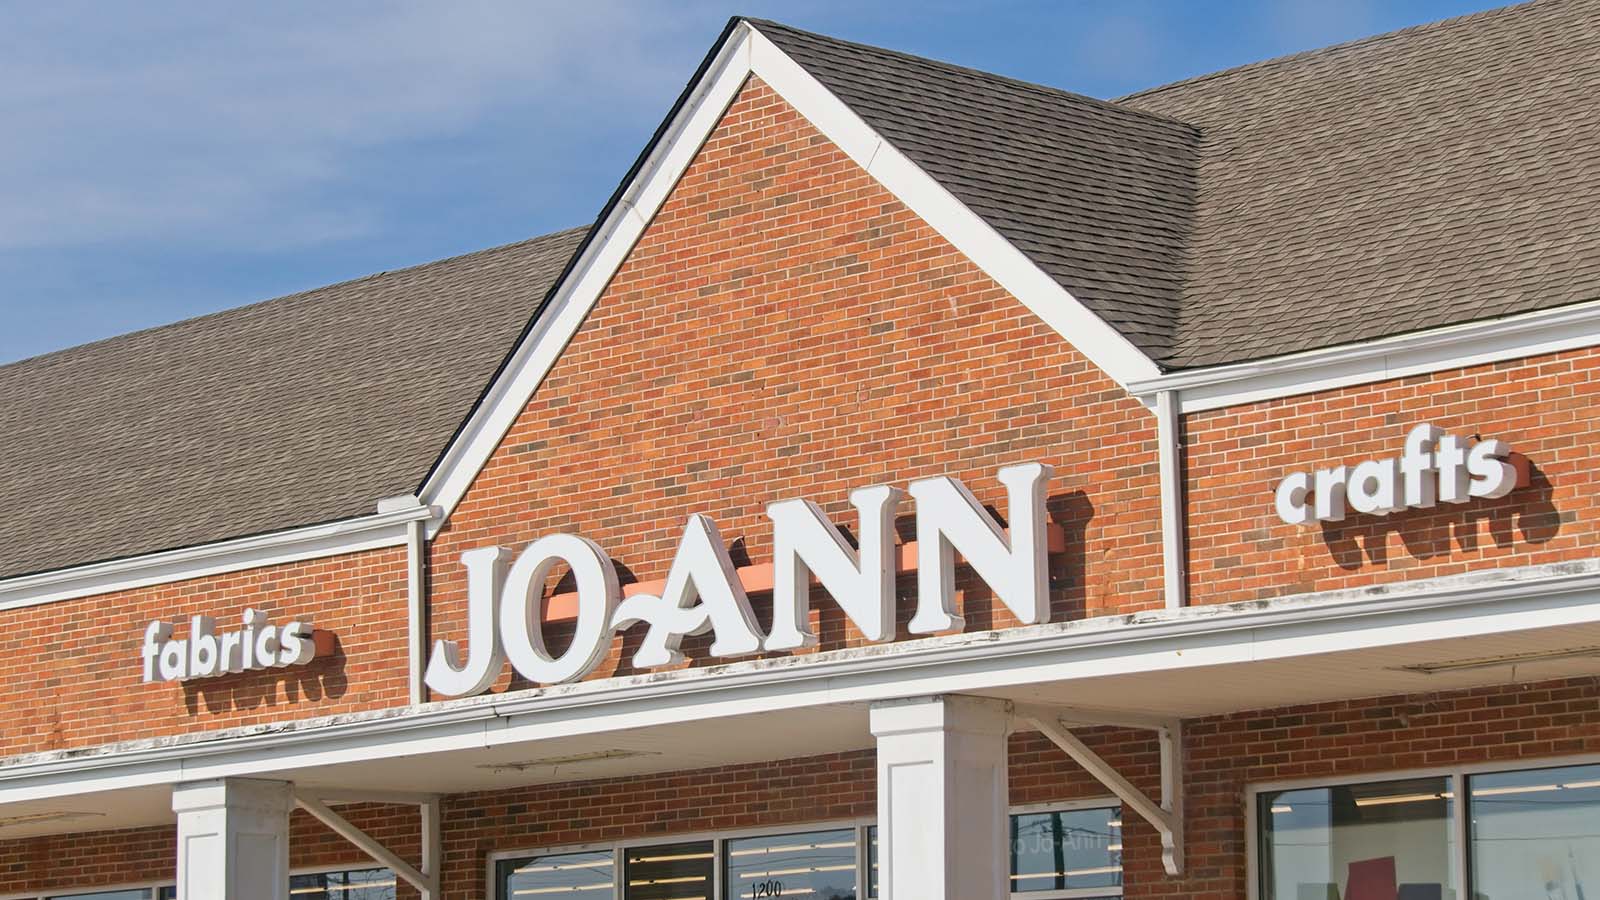 JOAN Stock Alert: Joann Is on the Brink of Bankruptcy